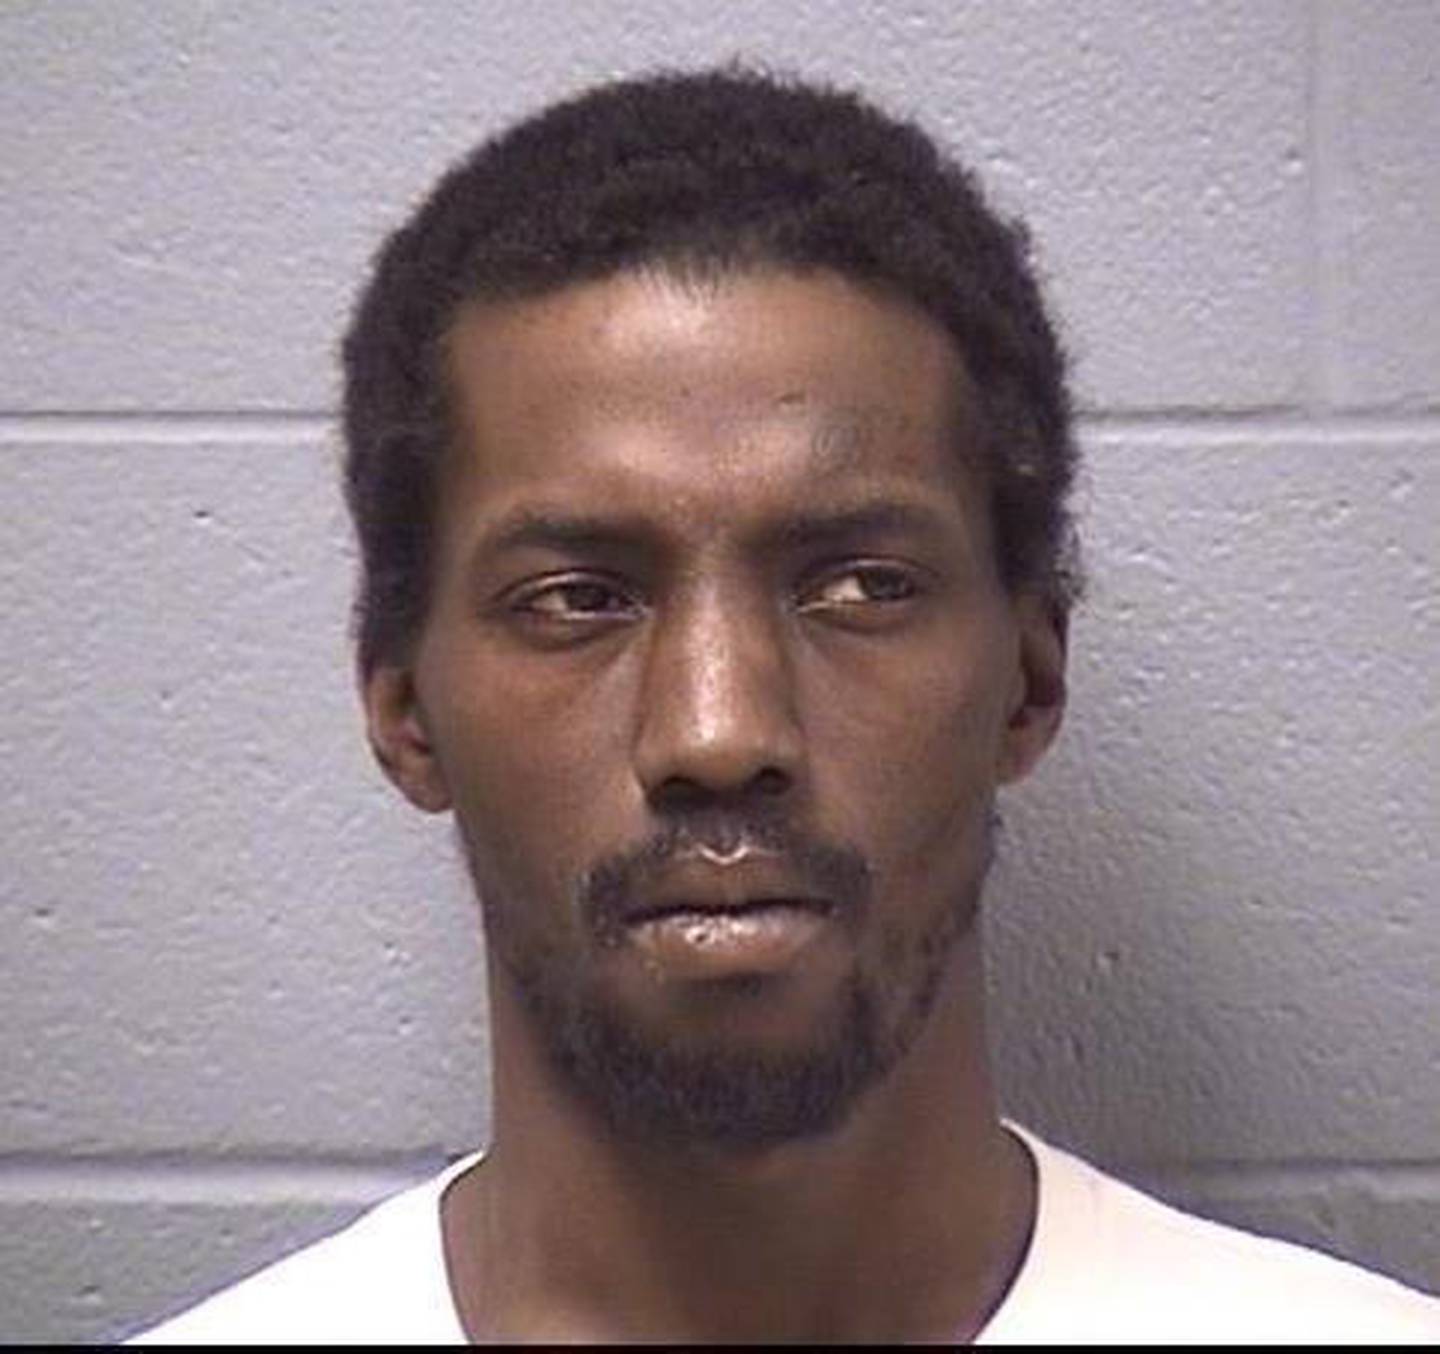 Robert A. Watson, 25, of the 700 block of Orlando Avenue in Normal was arrested by Joliet police and booked into the Will County jail March 25 on charges of murder with intent to kill or injure.